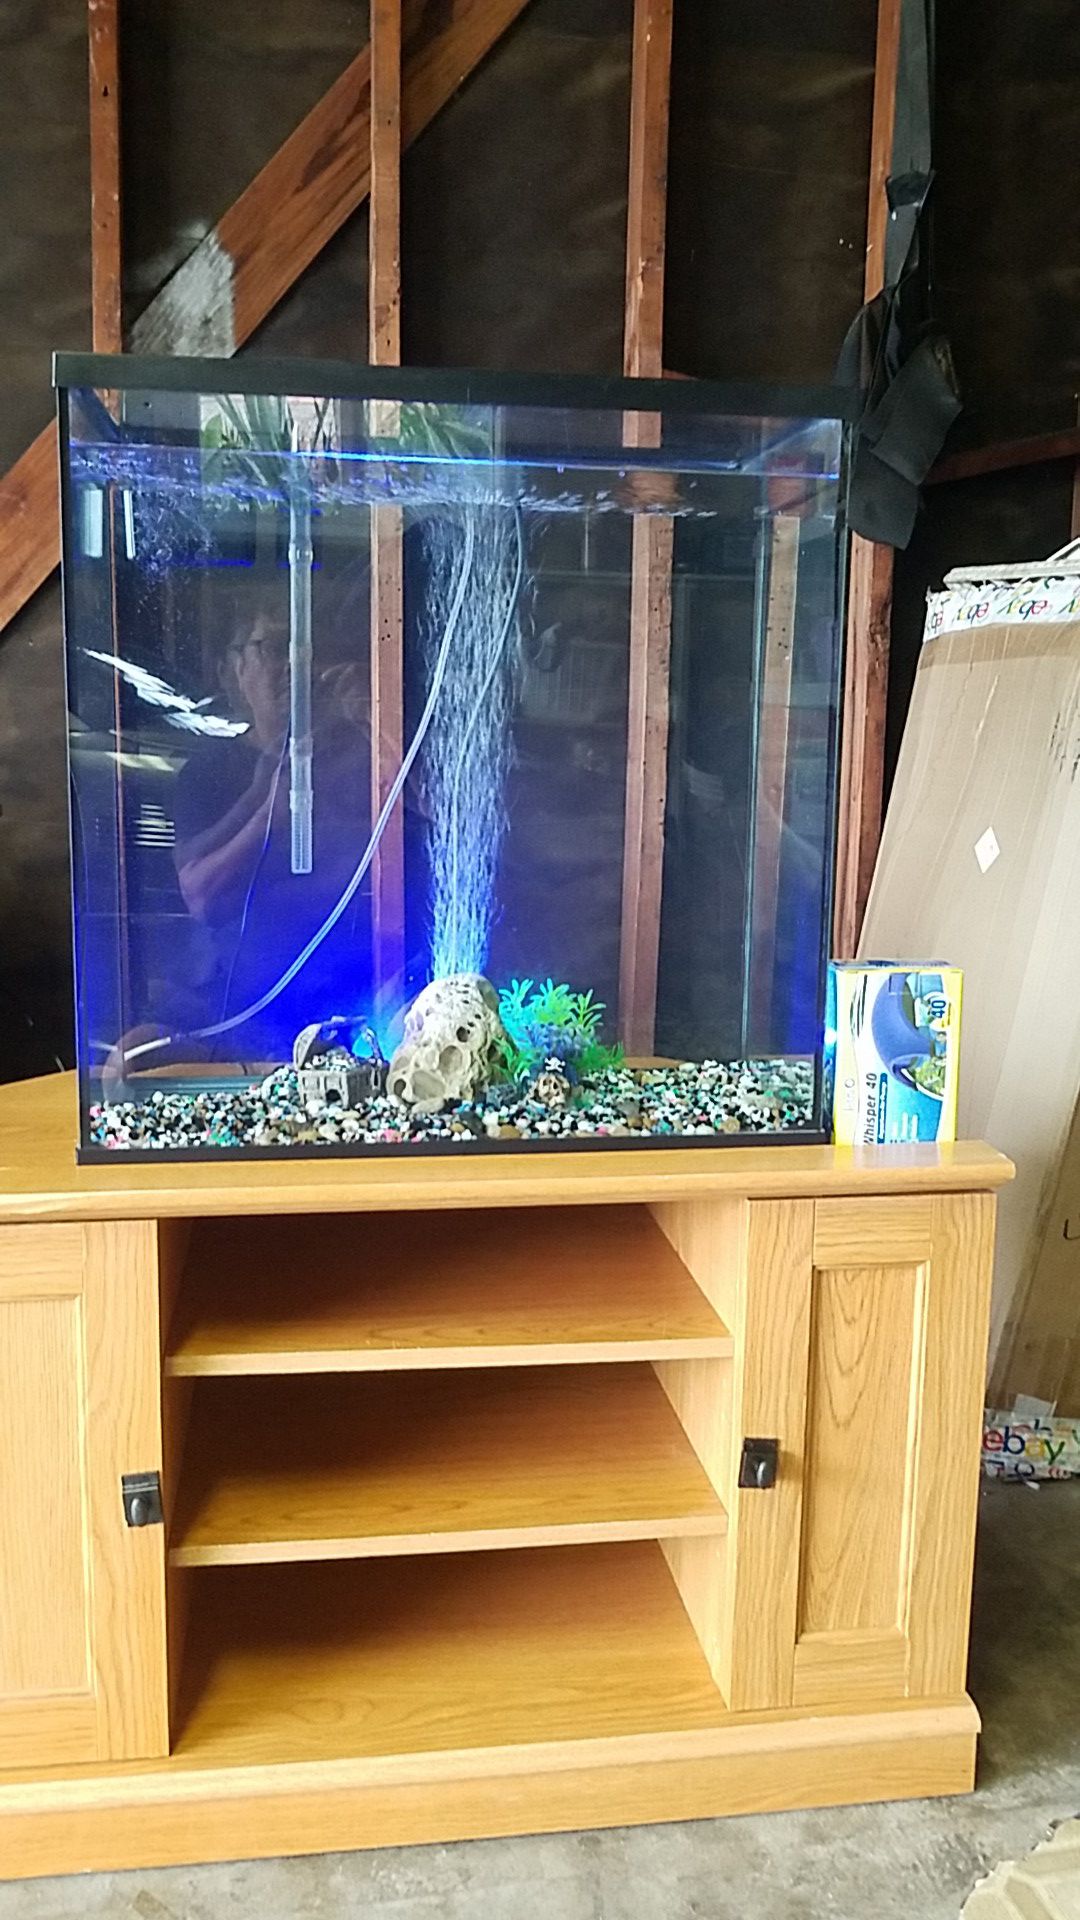 32 gallons A taller vertical beautiful fish tank come with stand In excellent condition comewith filter, brand new 40 gallon air pump ,decoration.